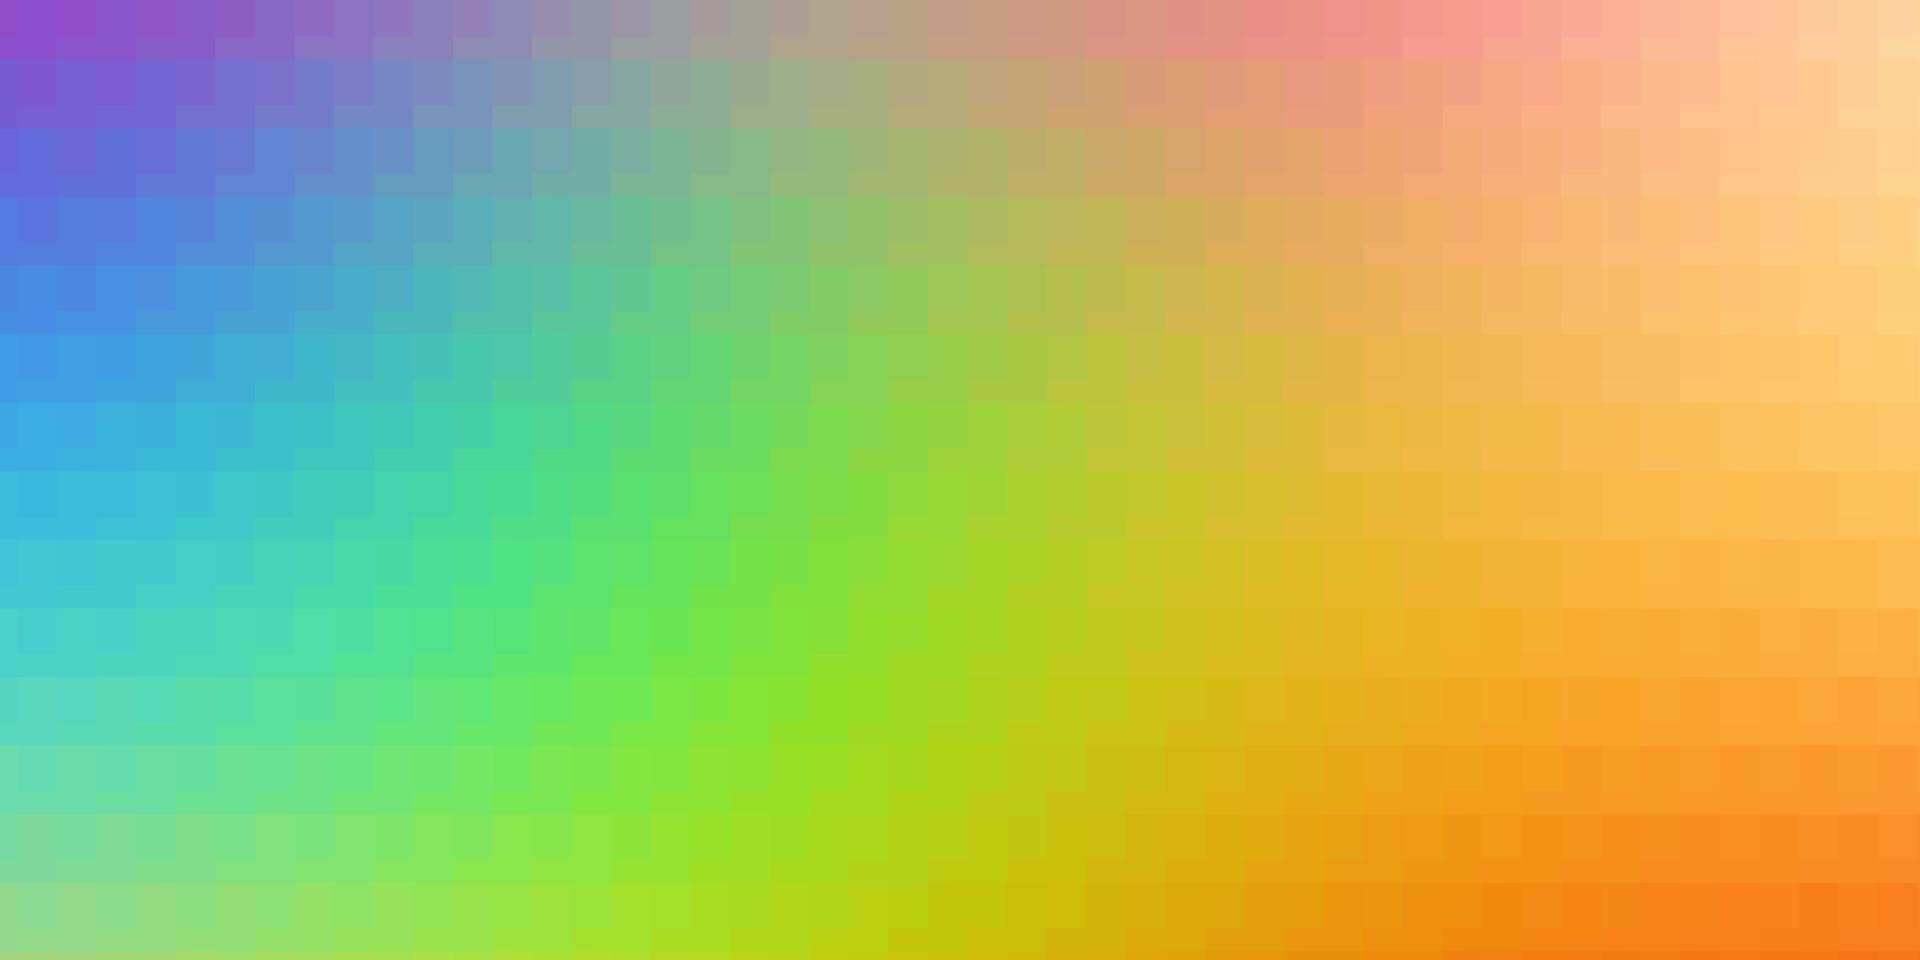 Light Multicolor vector background in polygonal style.